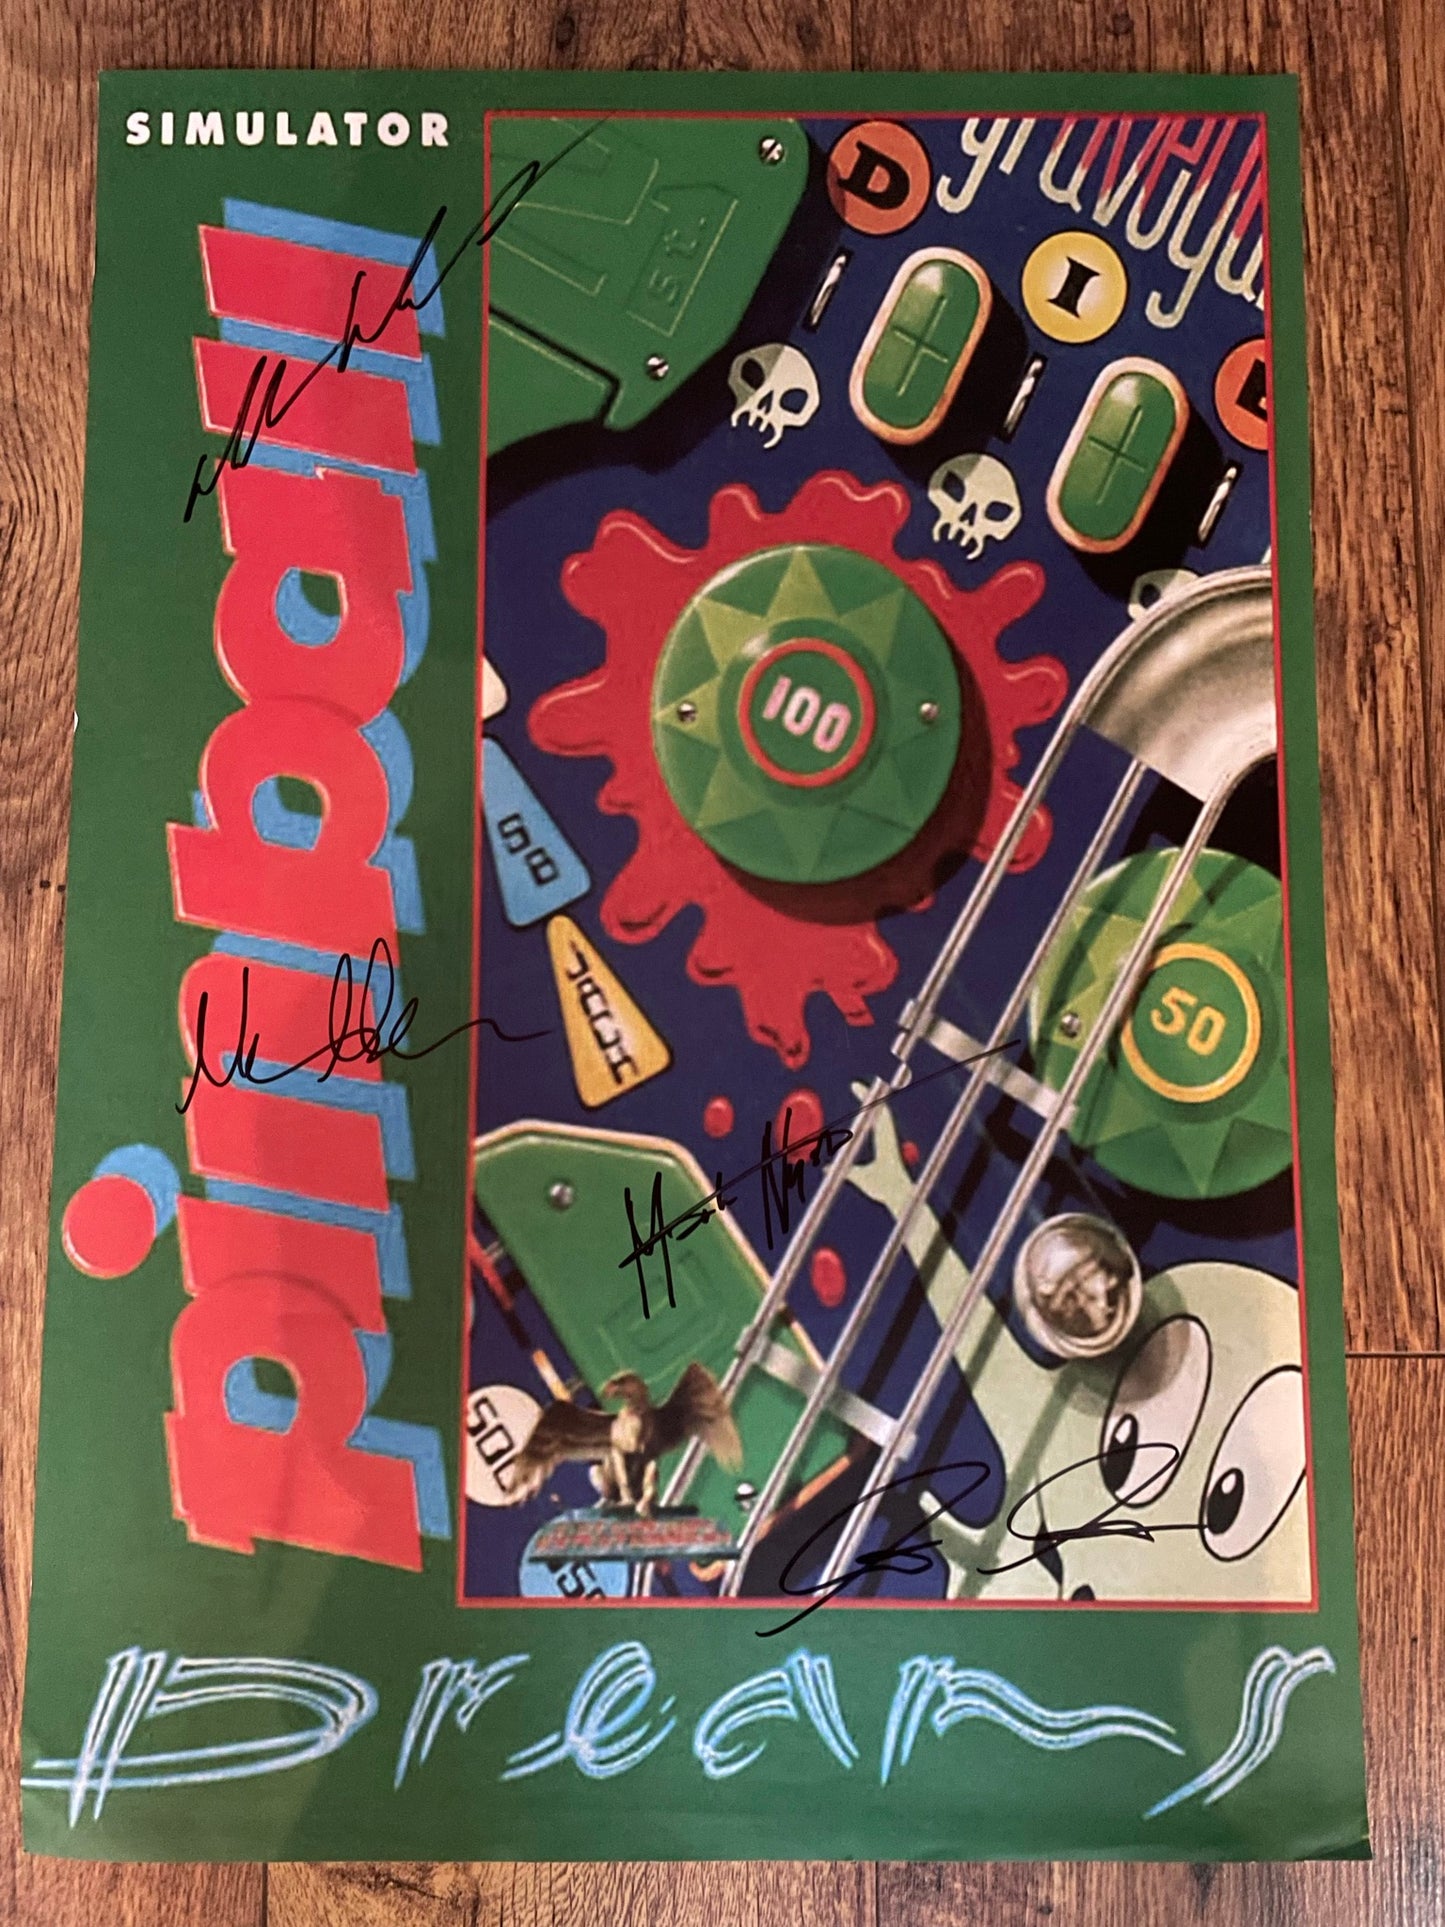 DICE Pinball Dreams 'Signed' A2 Poster - signed by FREDRIK LILJEGREN, ANDREAS AXELSSON, MARKUS NYSTRÖM, OLOF GUSTAFSSON